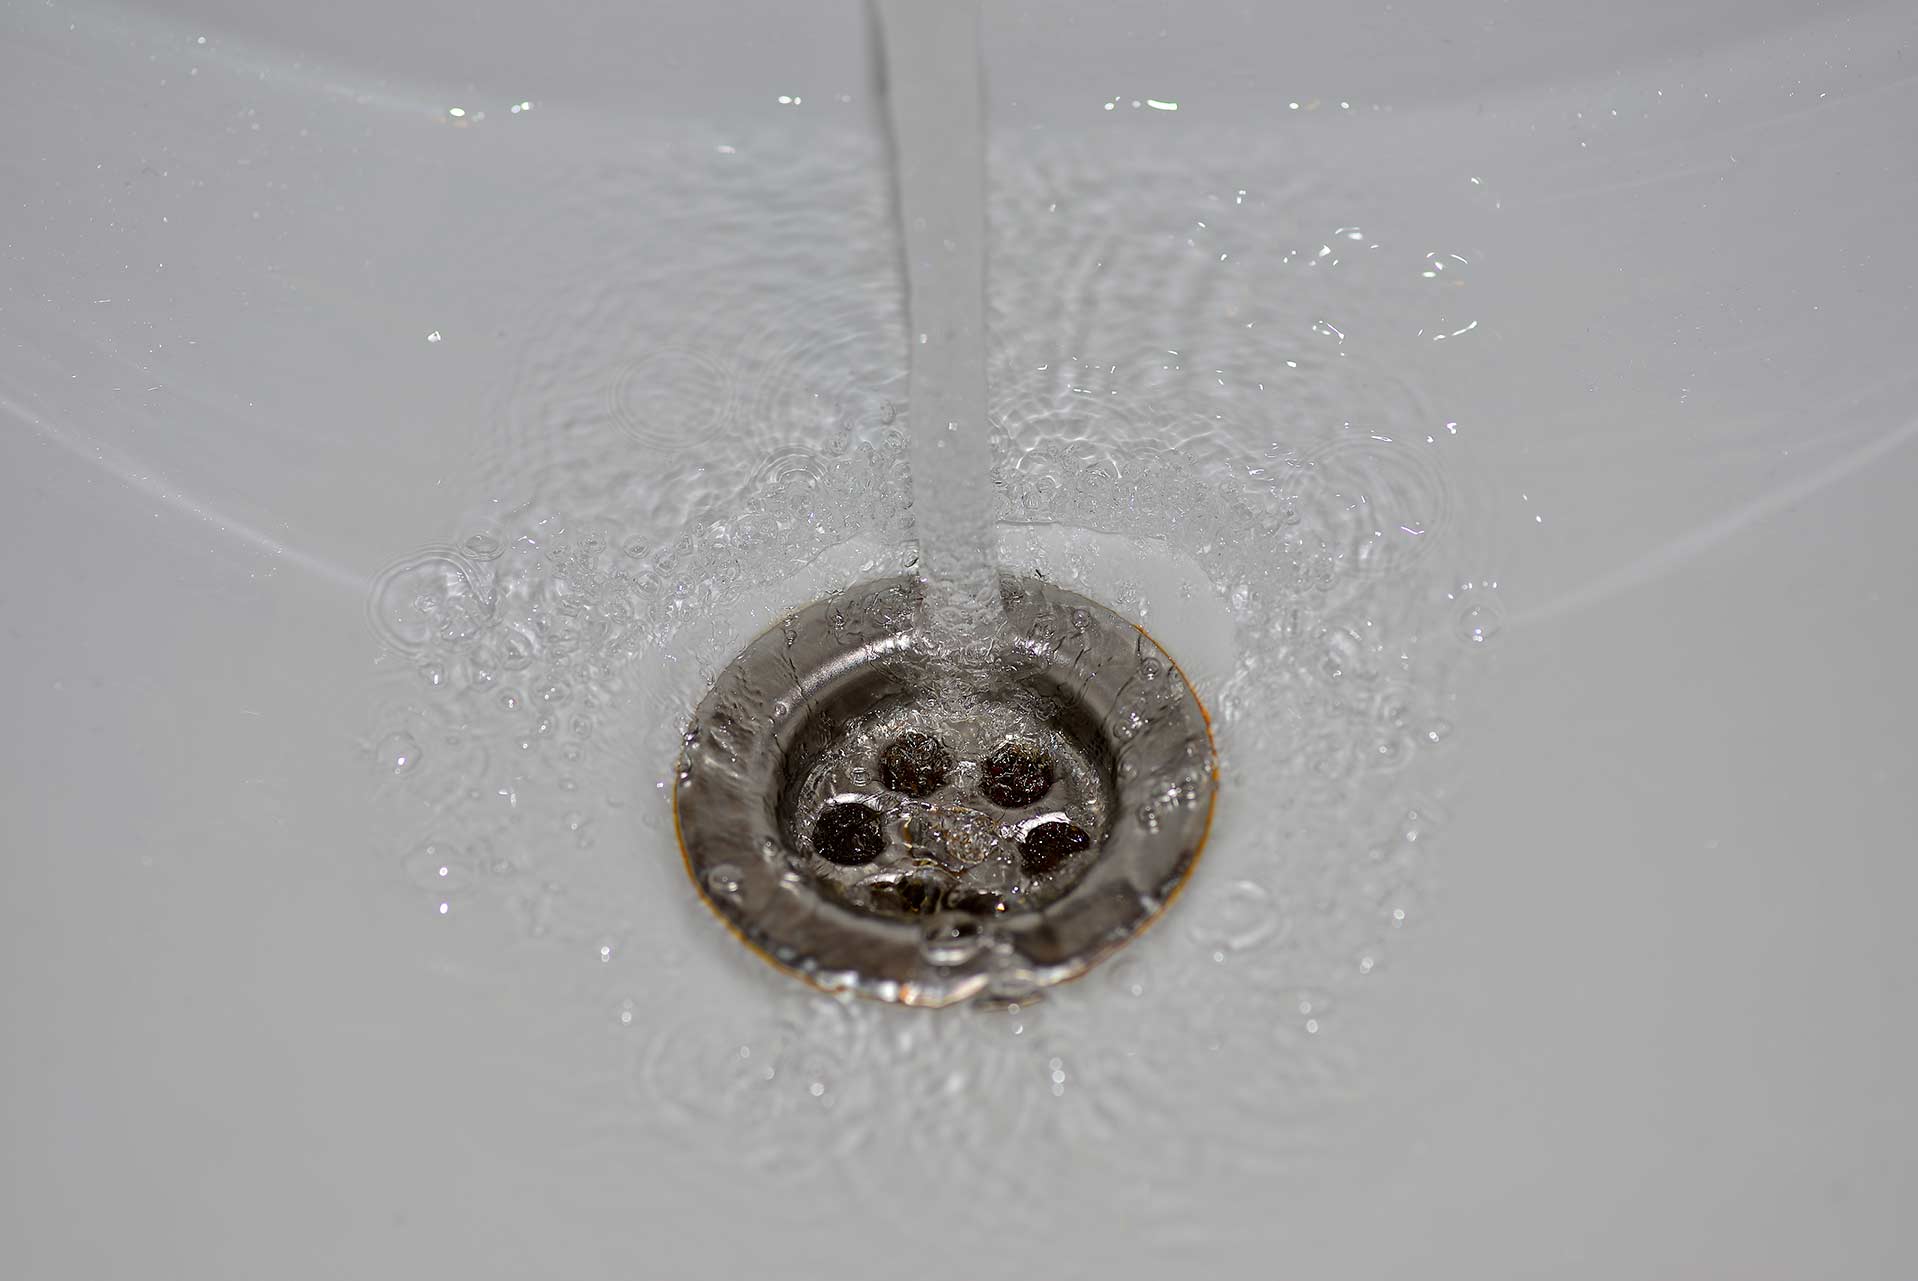 A2B Drains provides services to unblock blocked sinks and drains for properties in Braintree.